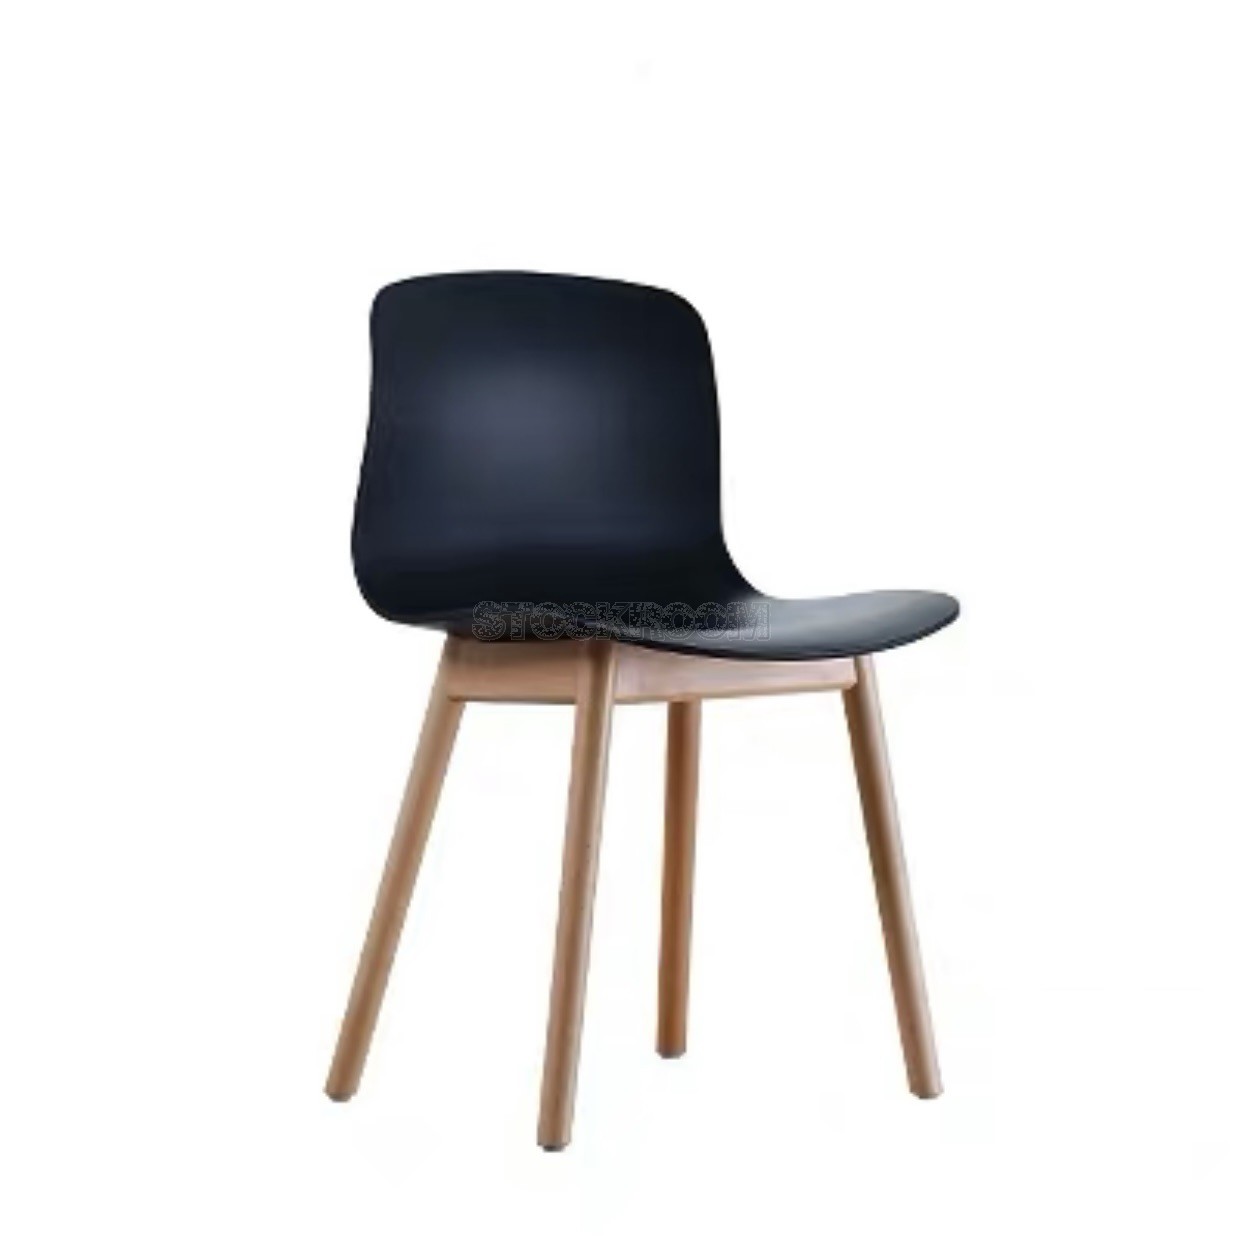 Ludger Dining Chair